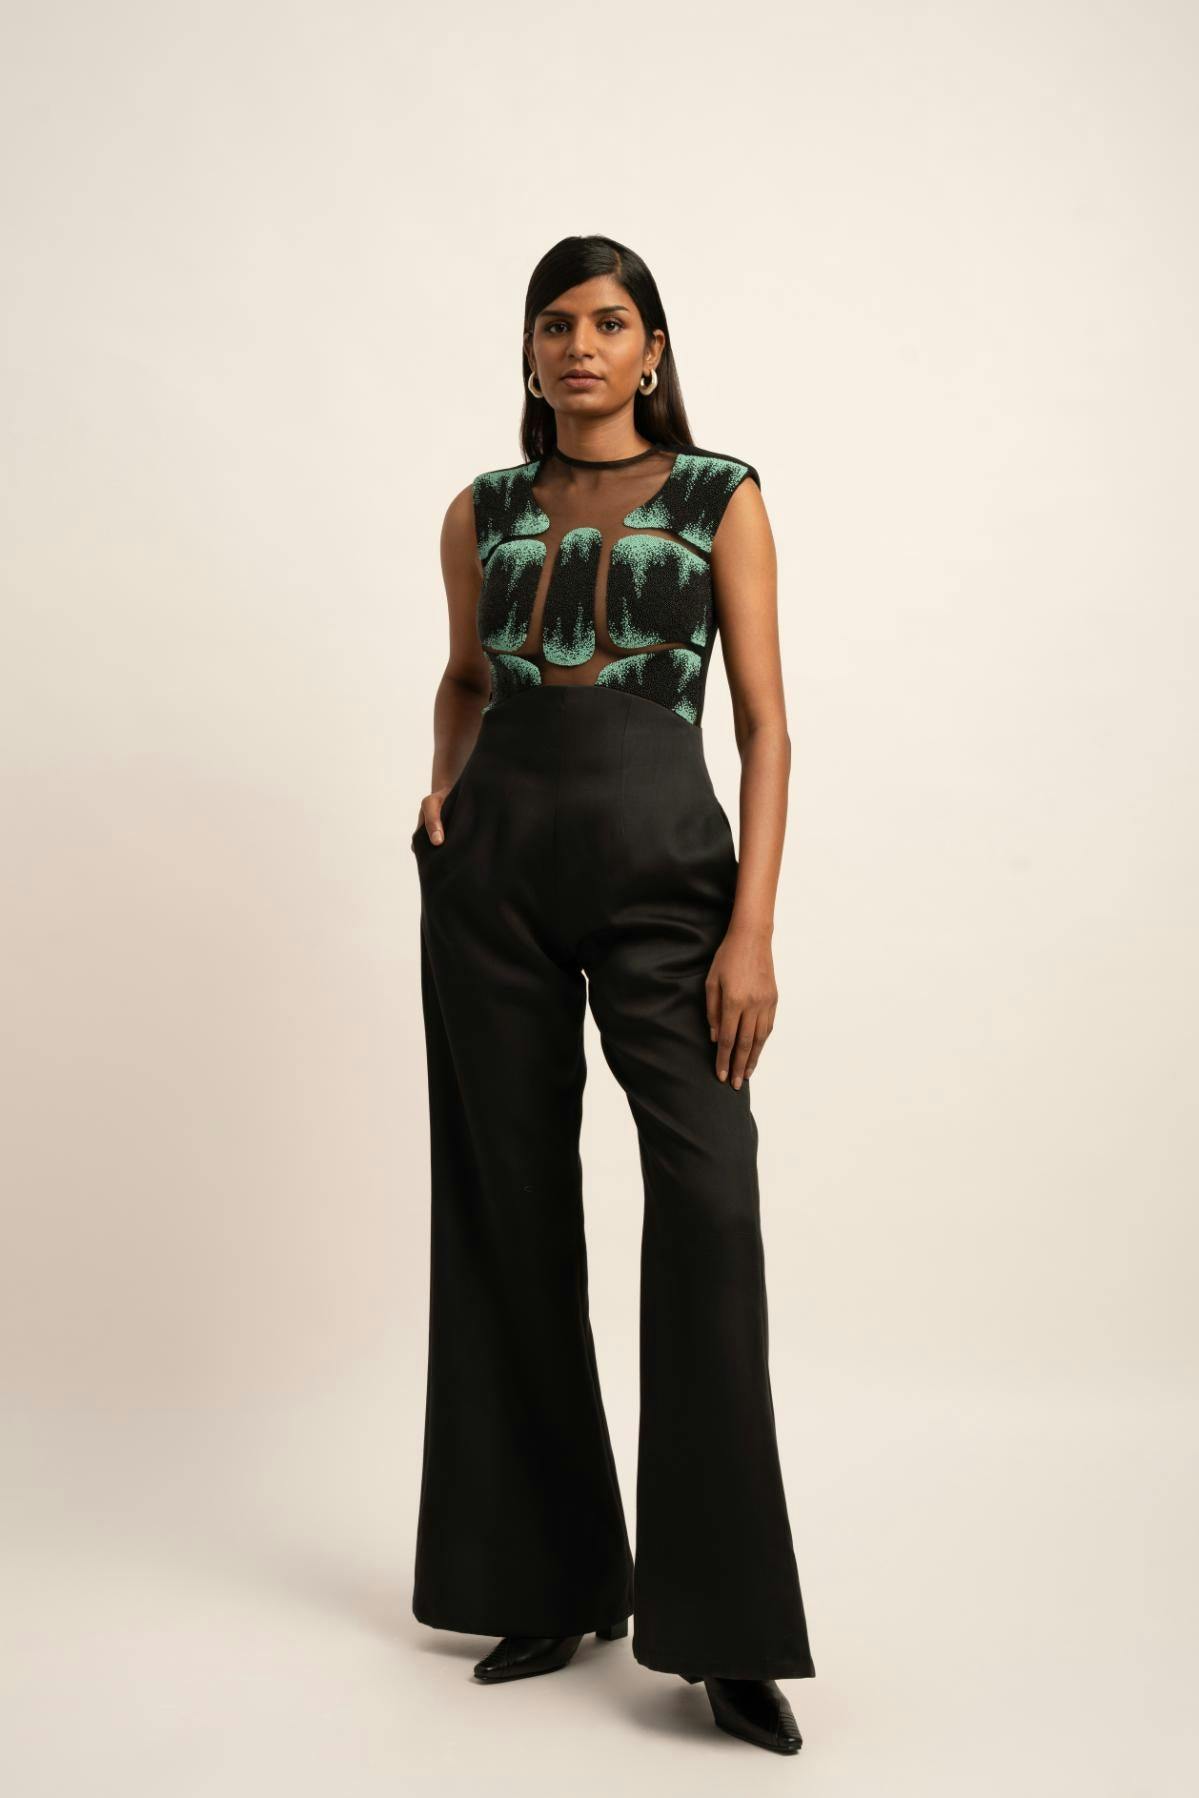 The Dreamwave Beaded Jumpsuit, a product by Siddhant Agrawal Label